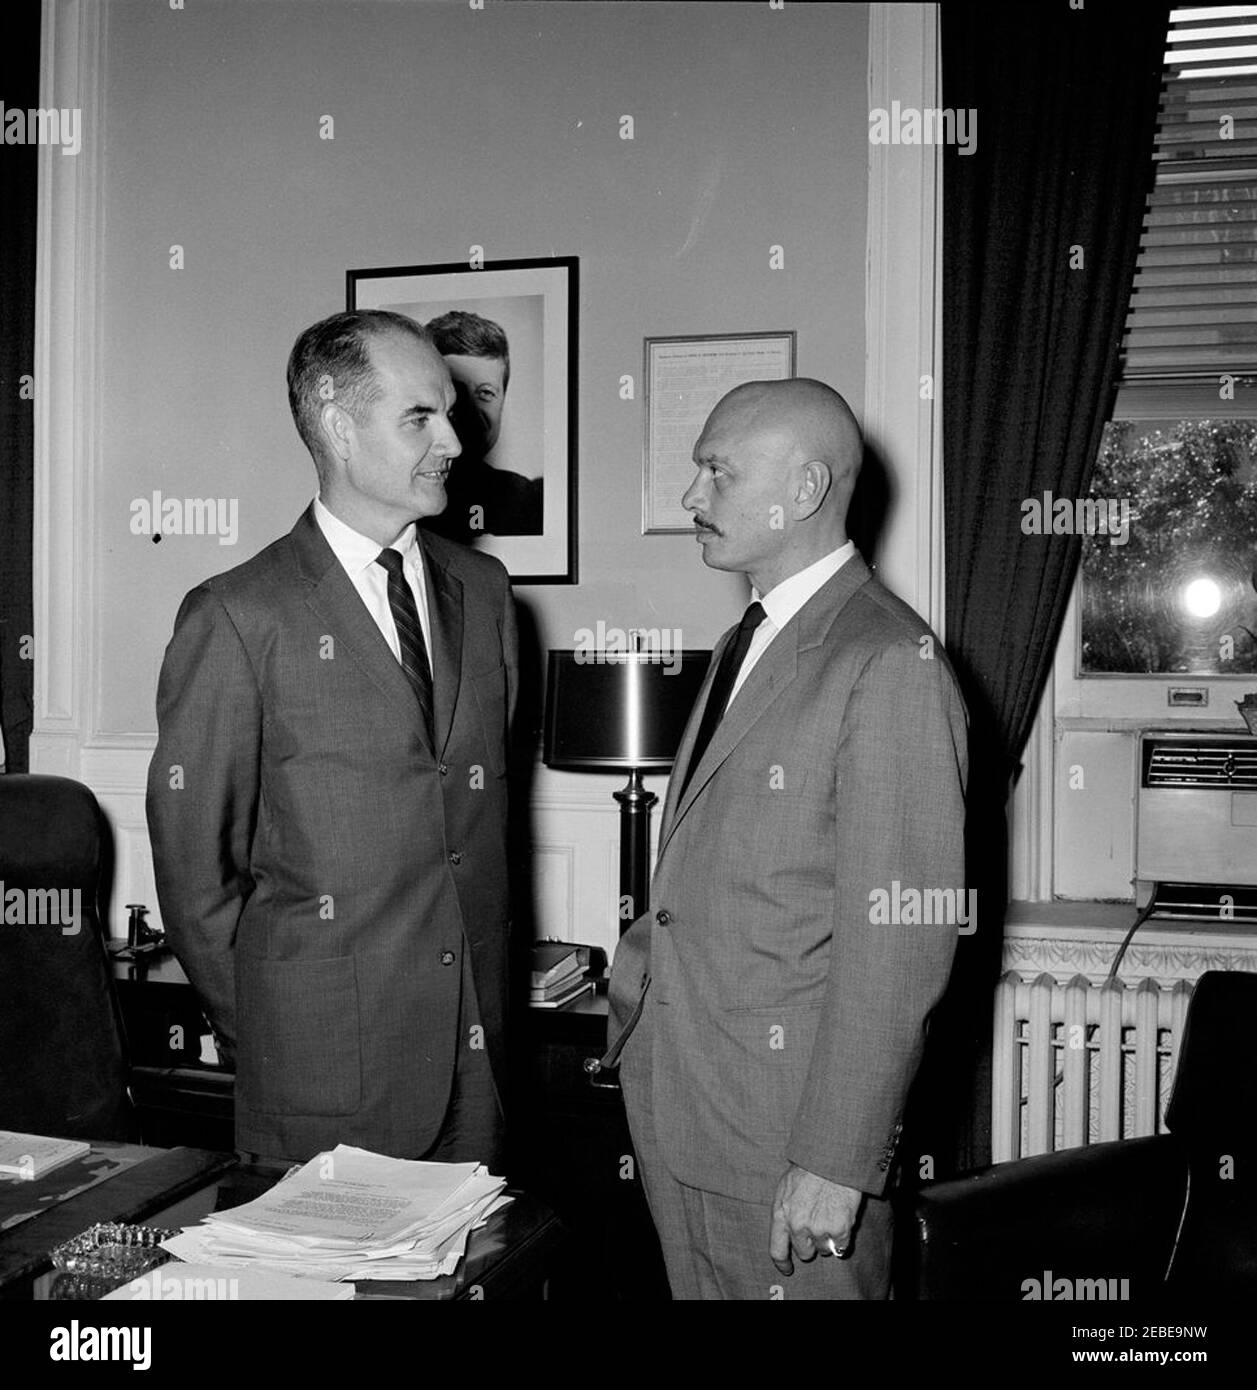 Director of Food for Peace George S. McGovern with Yul Brynner. Director of Food for Peace George McGovern meets with actor Yul Brynner, a member of the American Food for Peace Council, in the Food for Peace Offices, Executive Office Building, Washington, D.C. Stock Photo